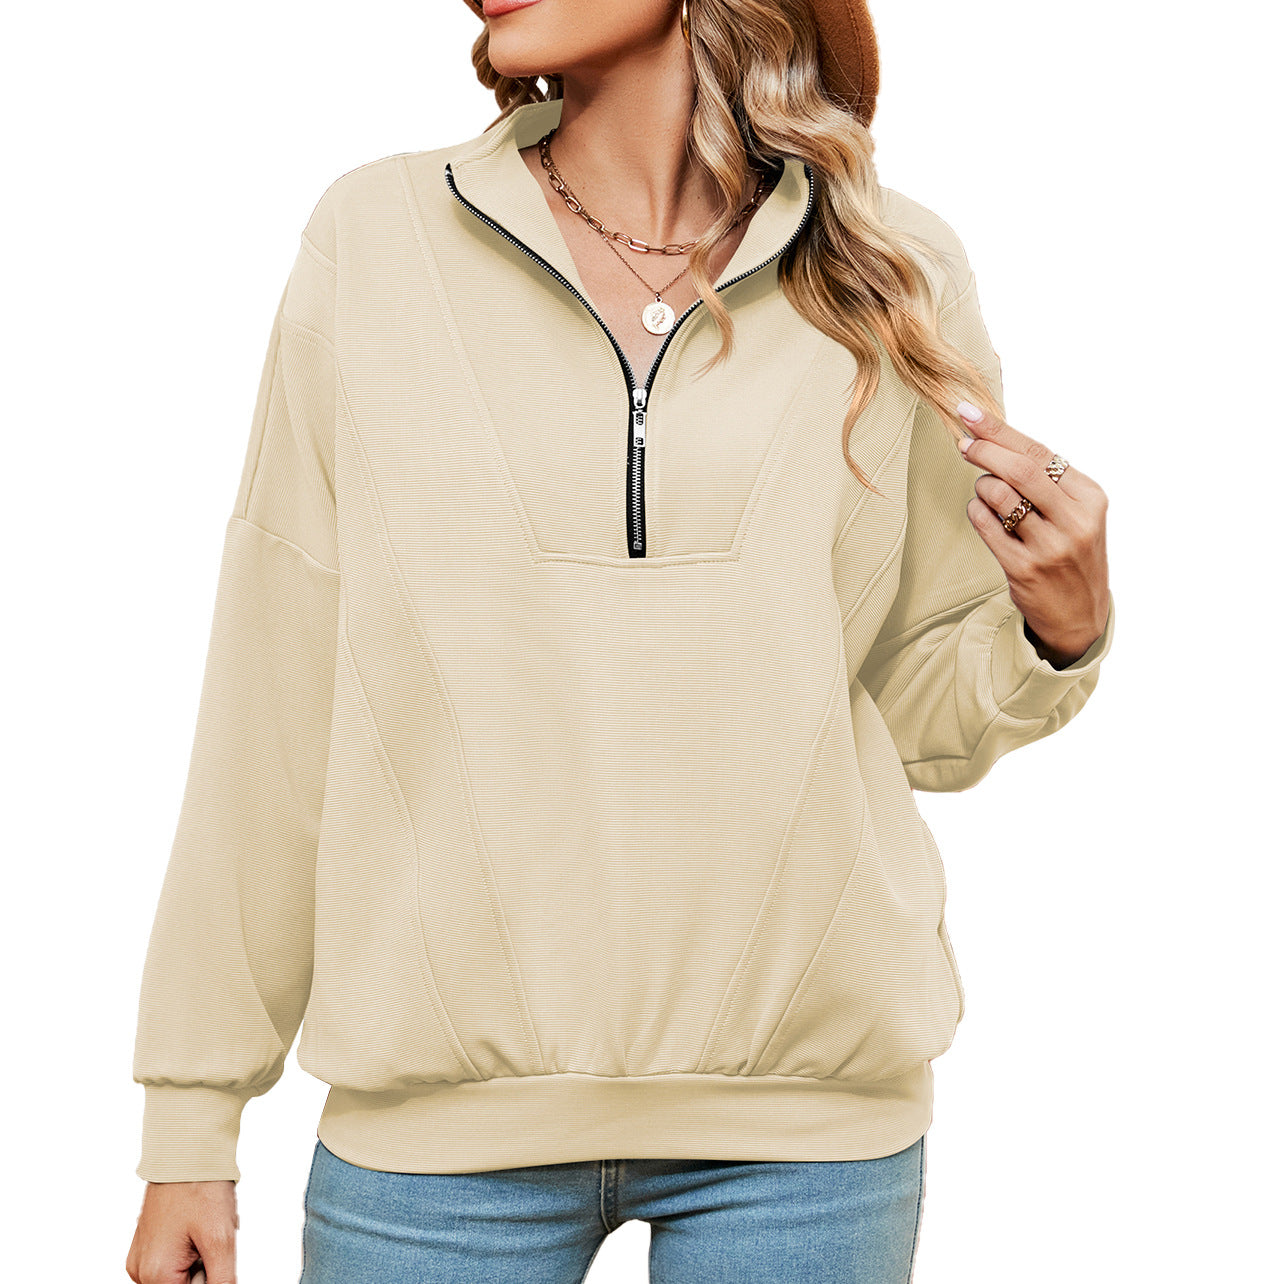 Women's Solid Color Zipper Loose Pullover For Coats